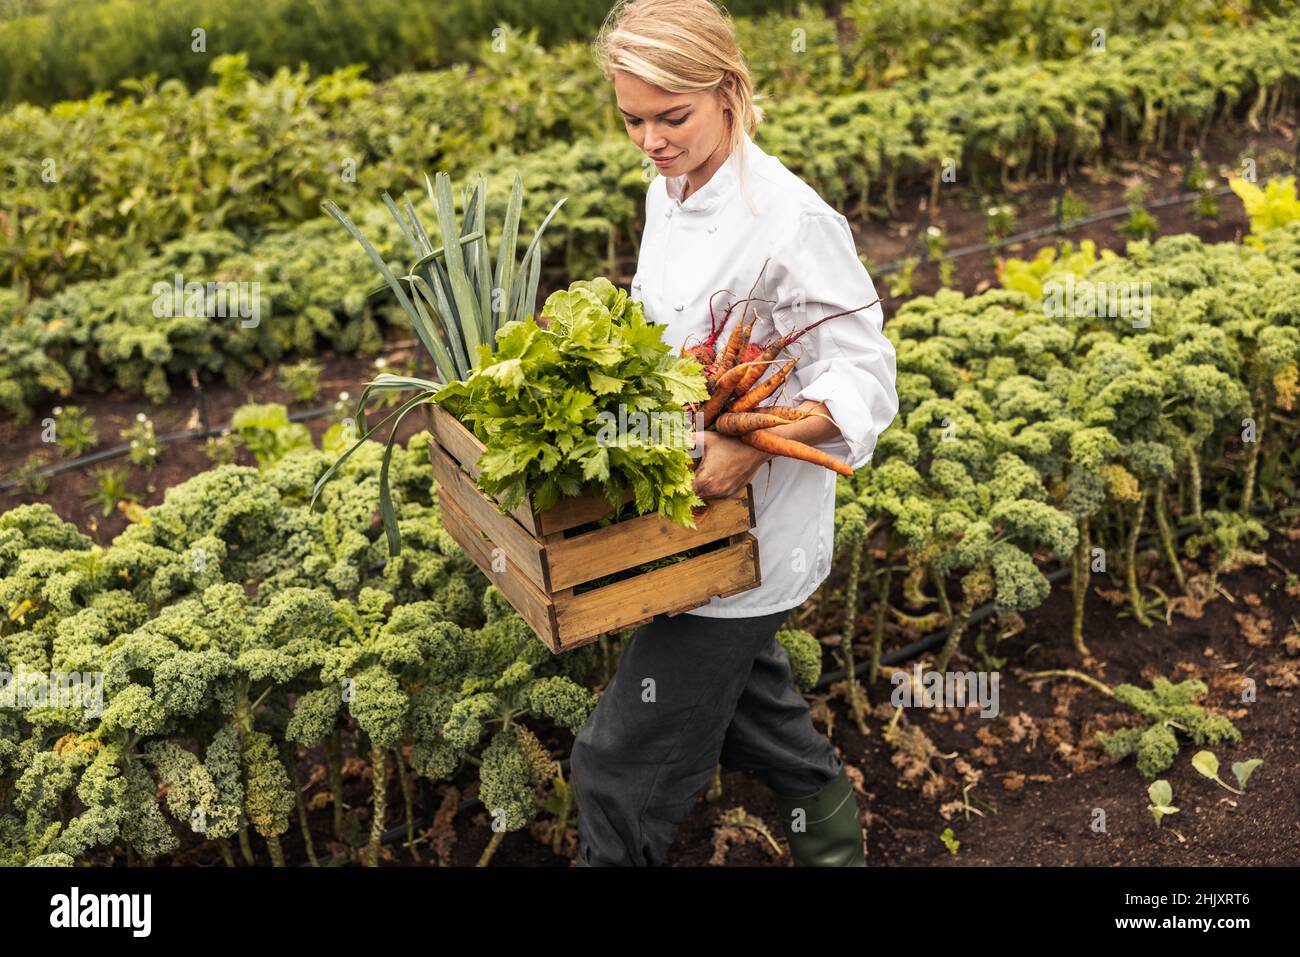 Female chef leaving an agricultural field with a variety of freshly picked vegetables. Self-sustainable female chef carrying a crate full of fresh pro Stock Photo